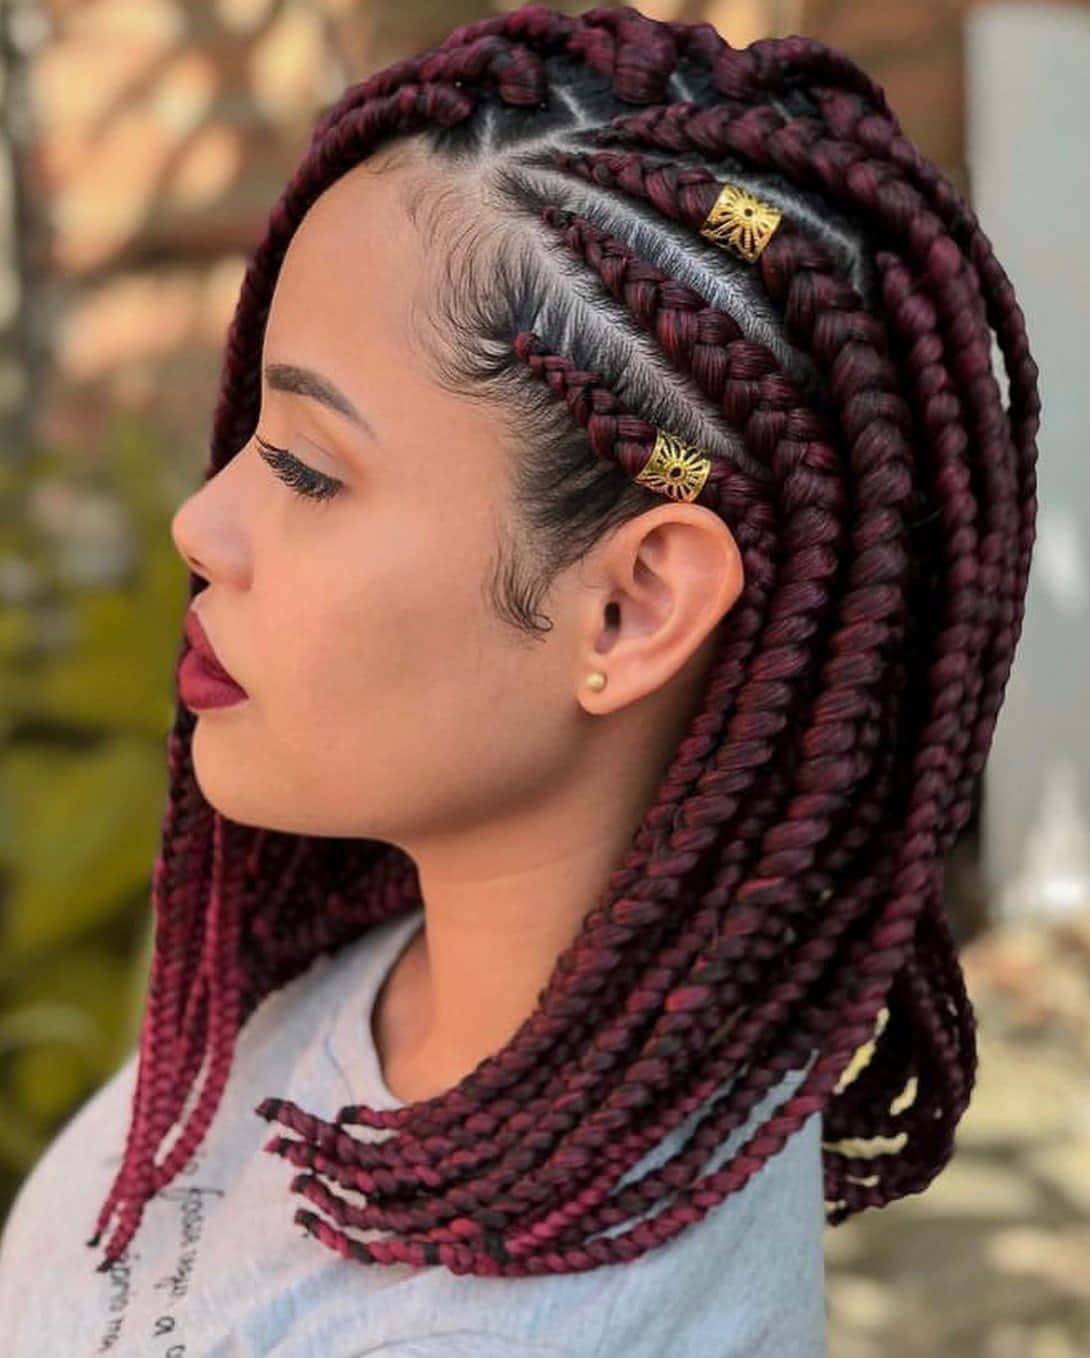 https://wallpapers.com/images/hd/braids-hairstyles-2022-picture-d5686nuox1xrrufg.jpg